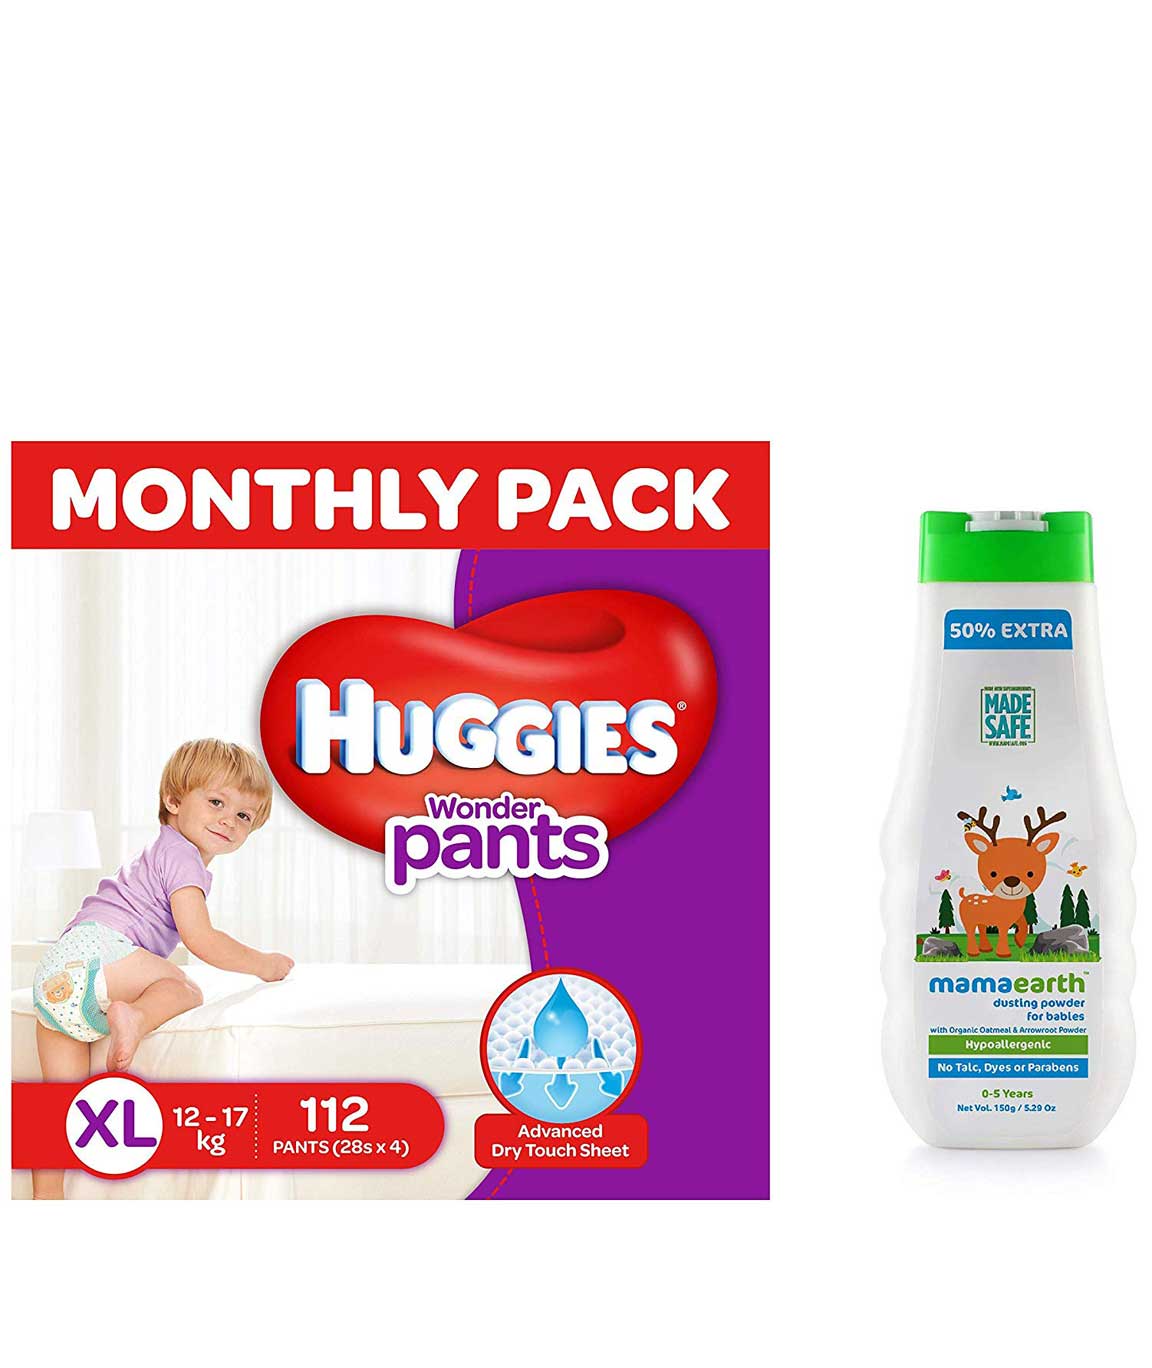 Huggies Wonder Pants Extra Large Size Diapers Monthly Pack (112 Count) & Mamaearth Natural Insect Repellent for babies (100 ml)